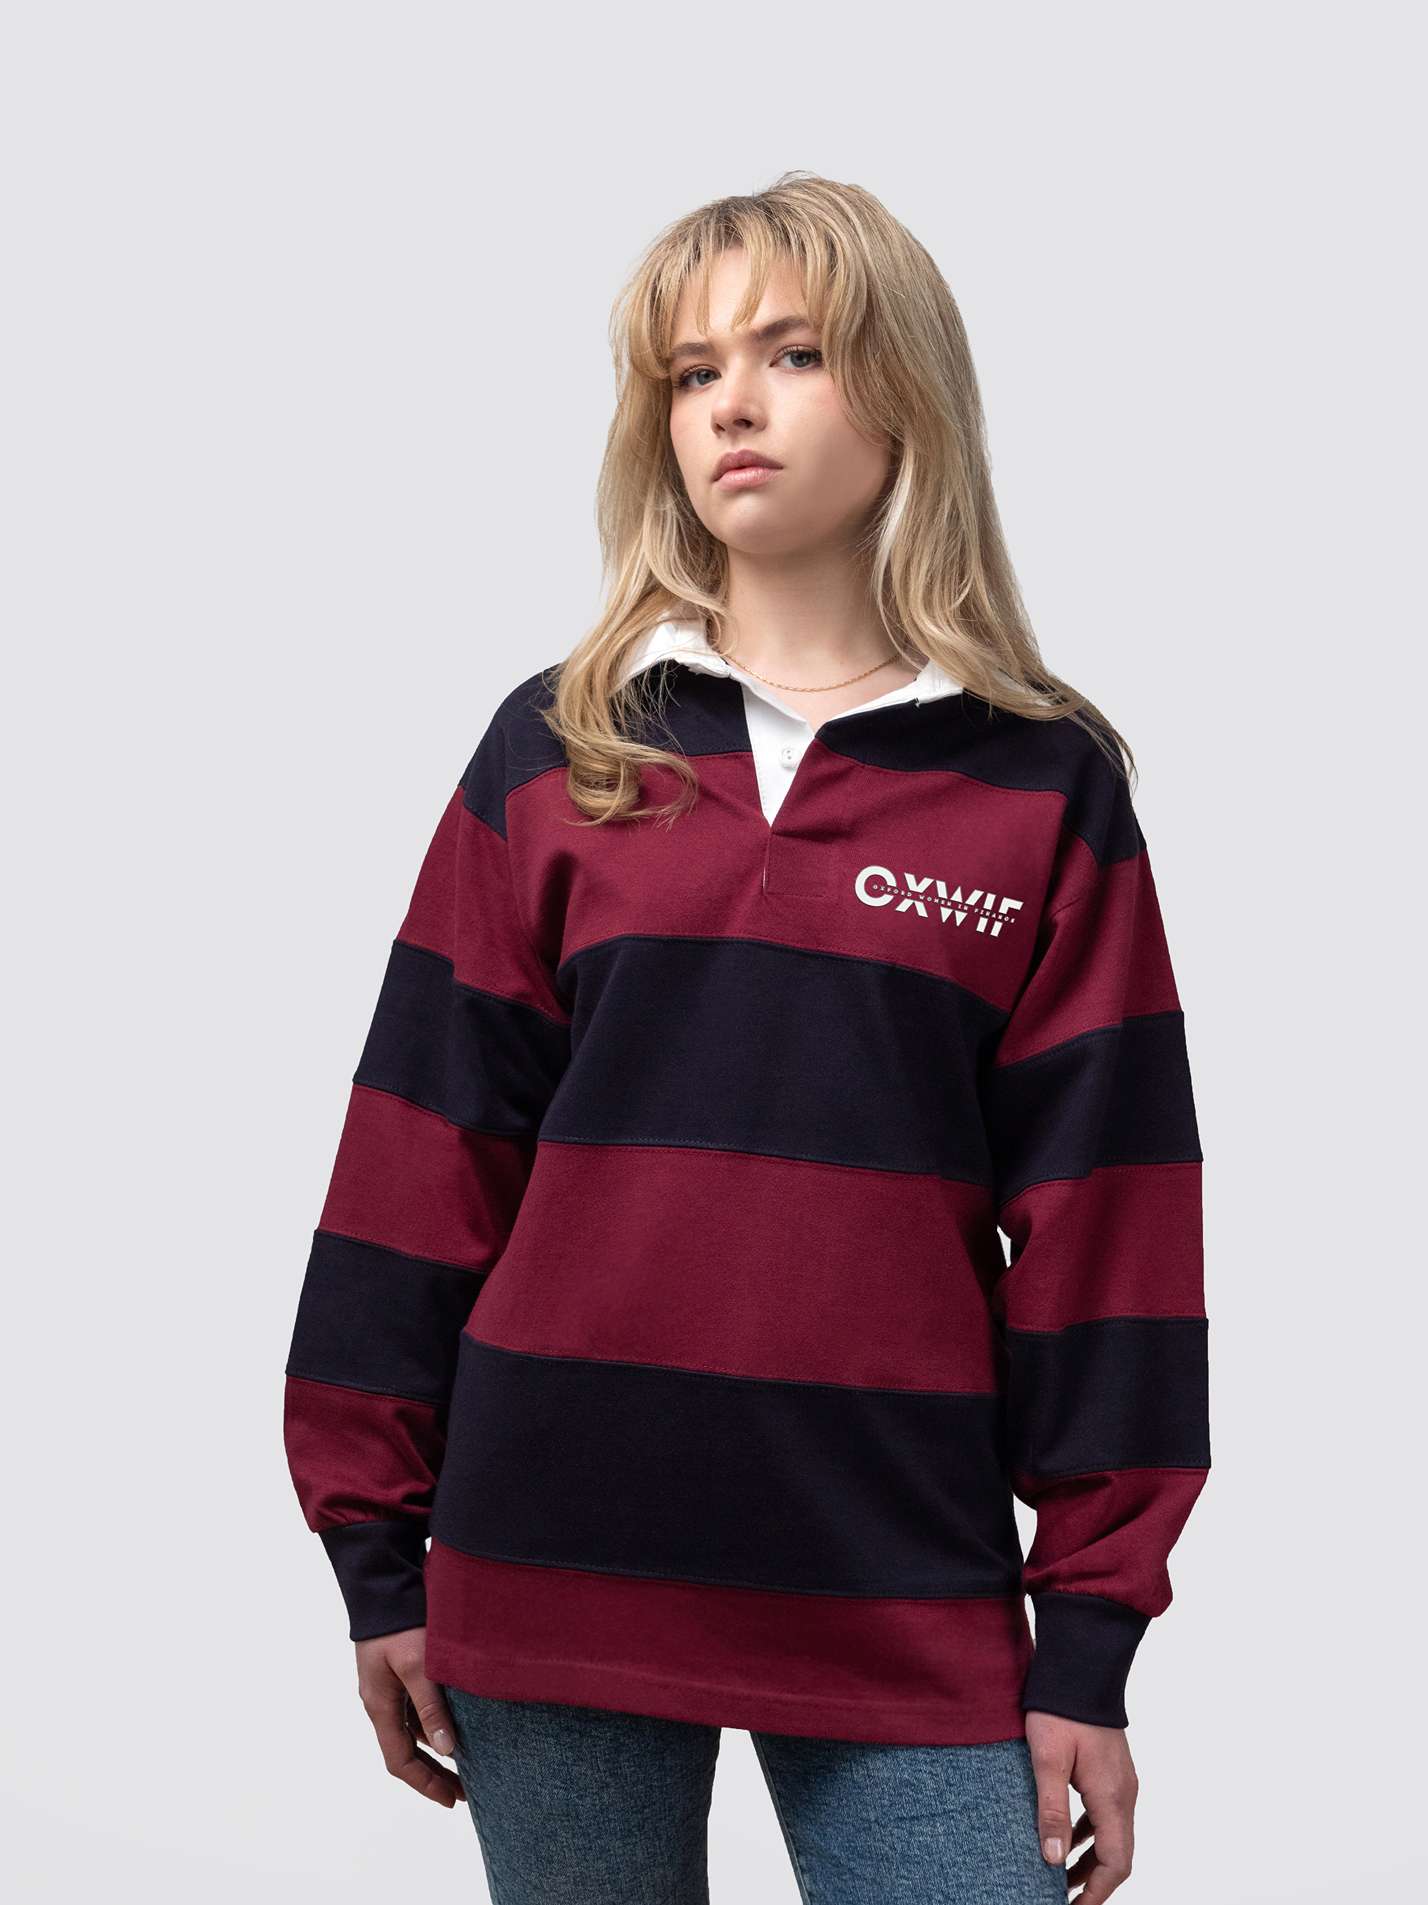 Oxford Women in Finance Striped Rugby Shirt